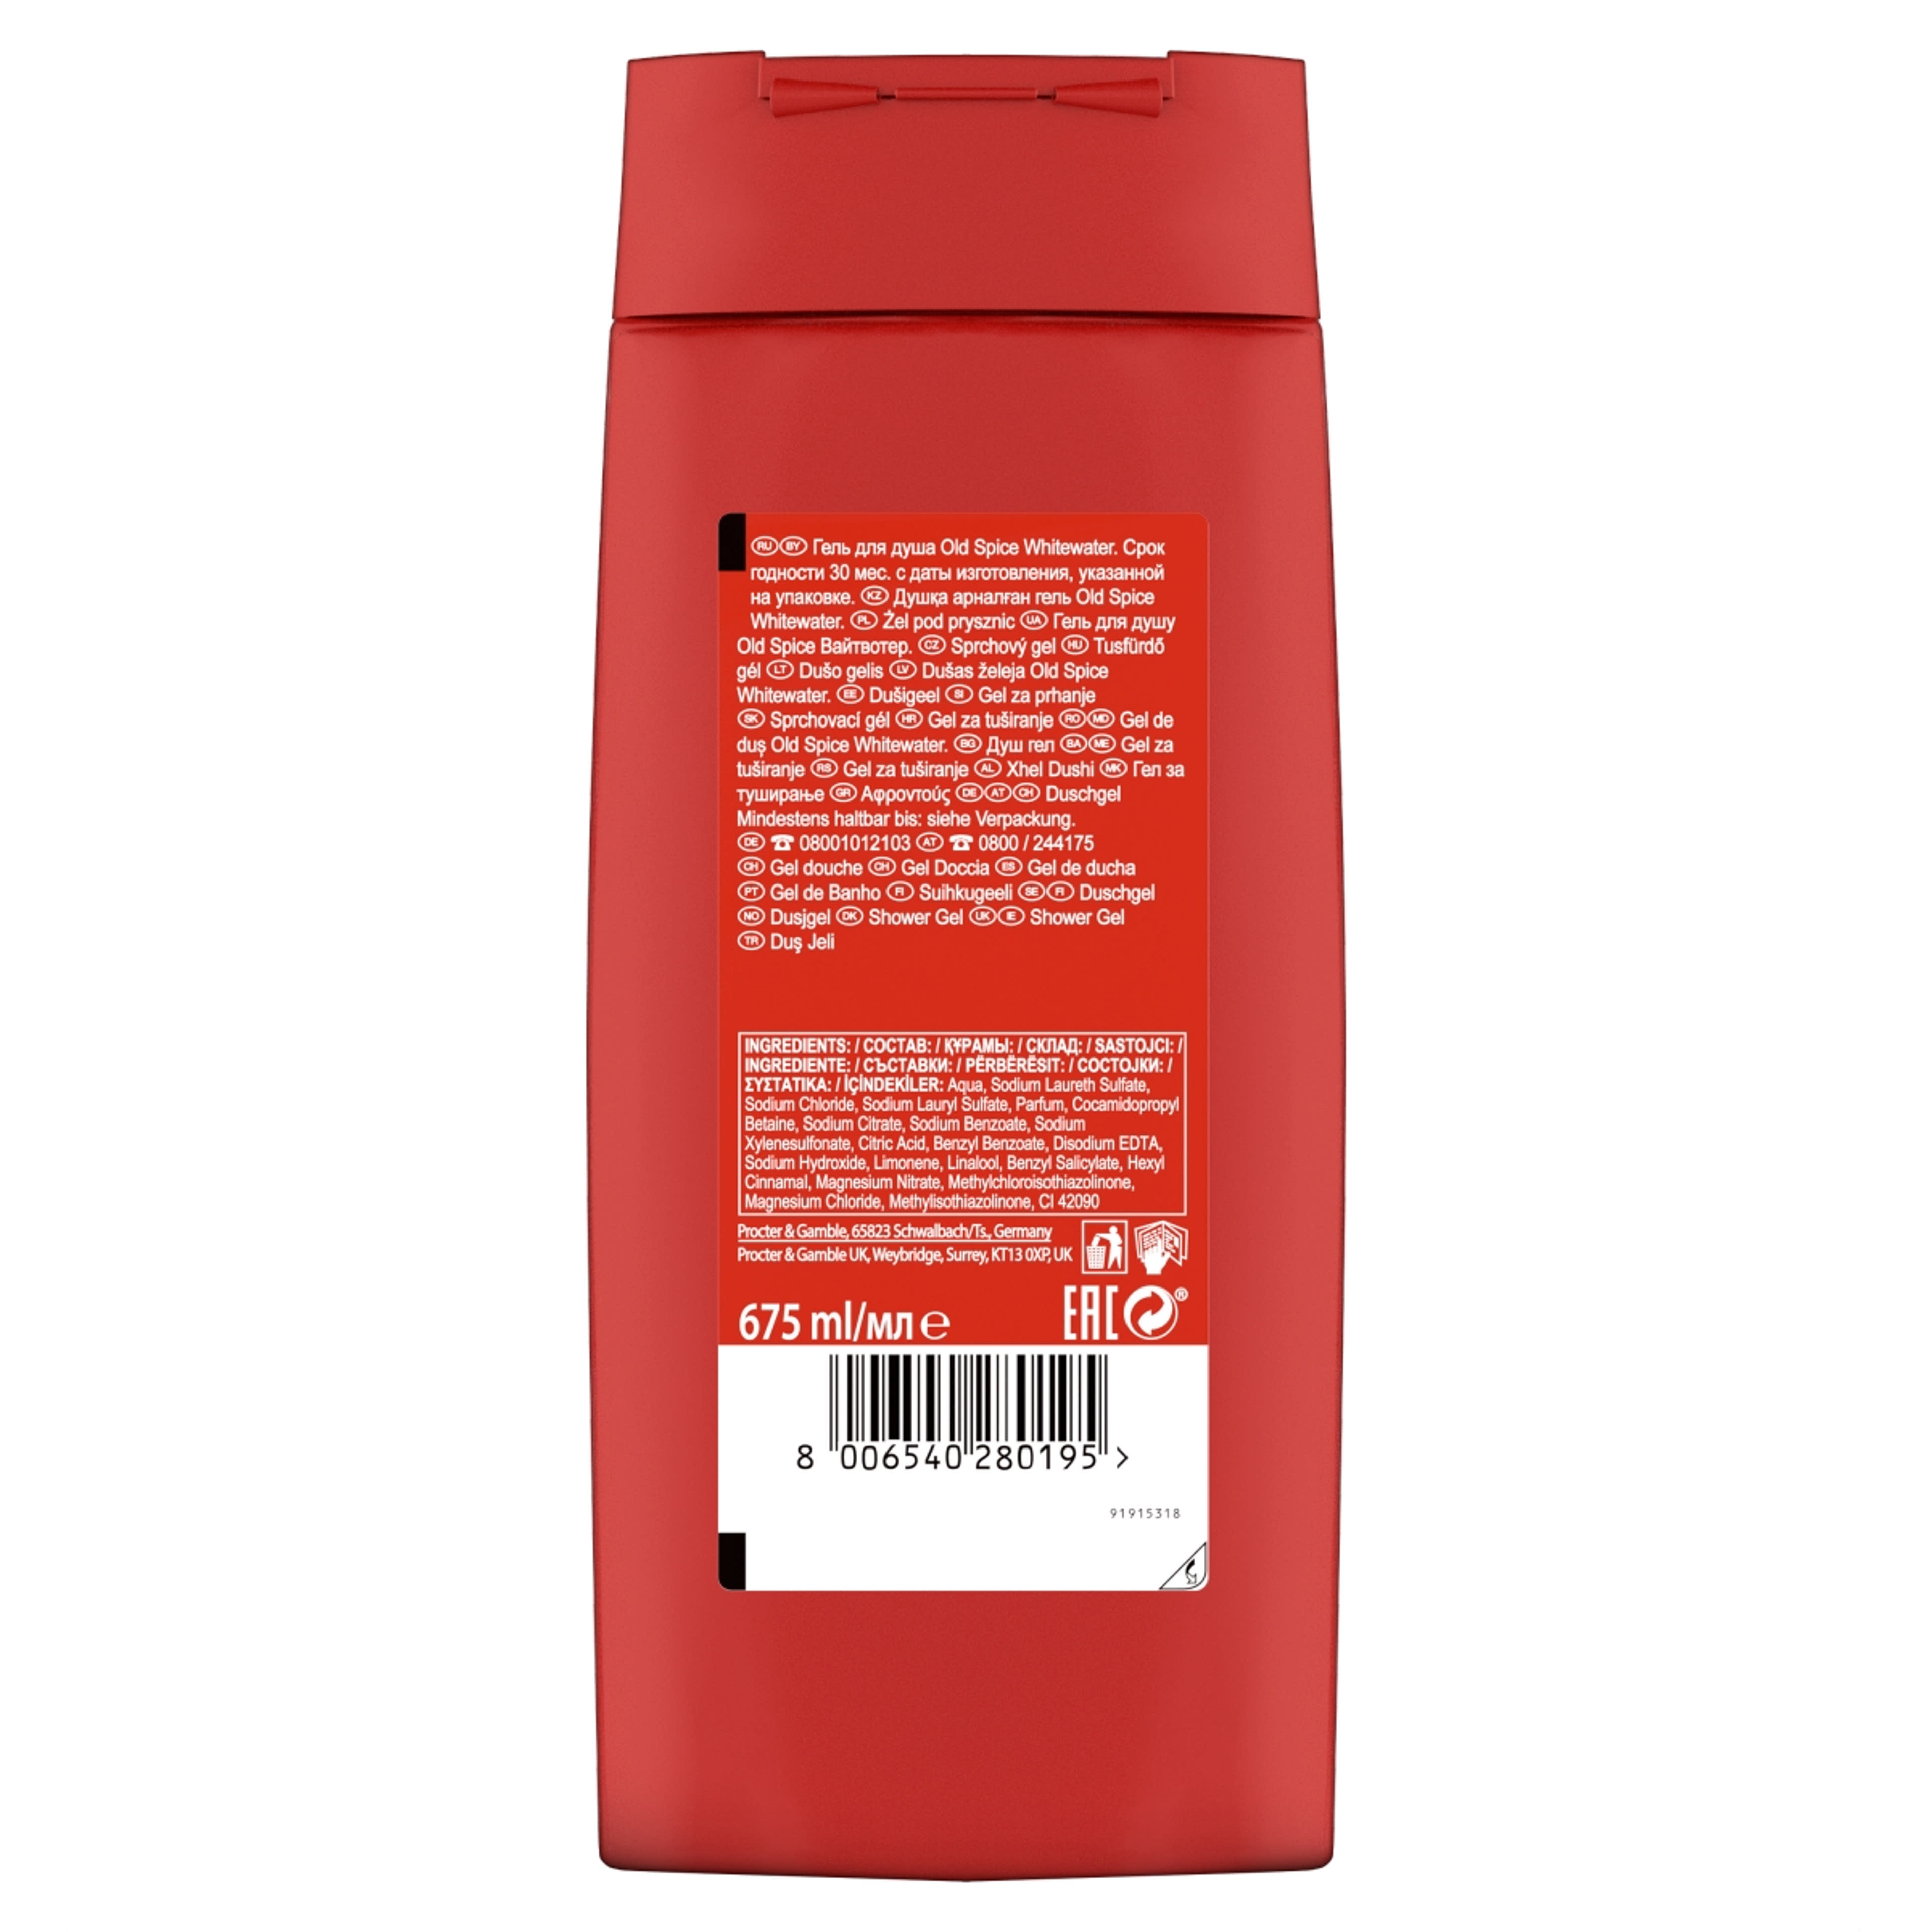 Old Spice Whitewater tusfürdő - 675 ml-2